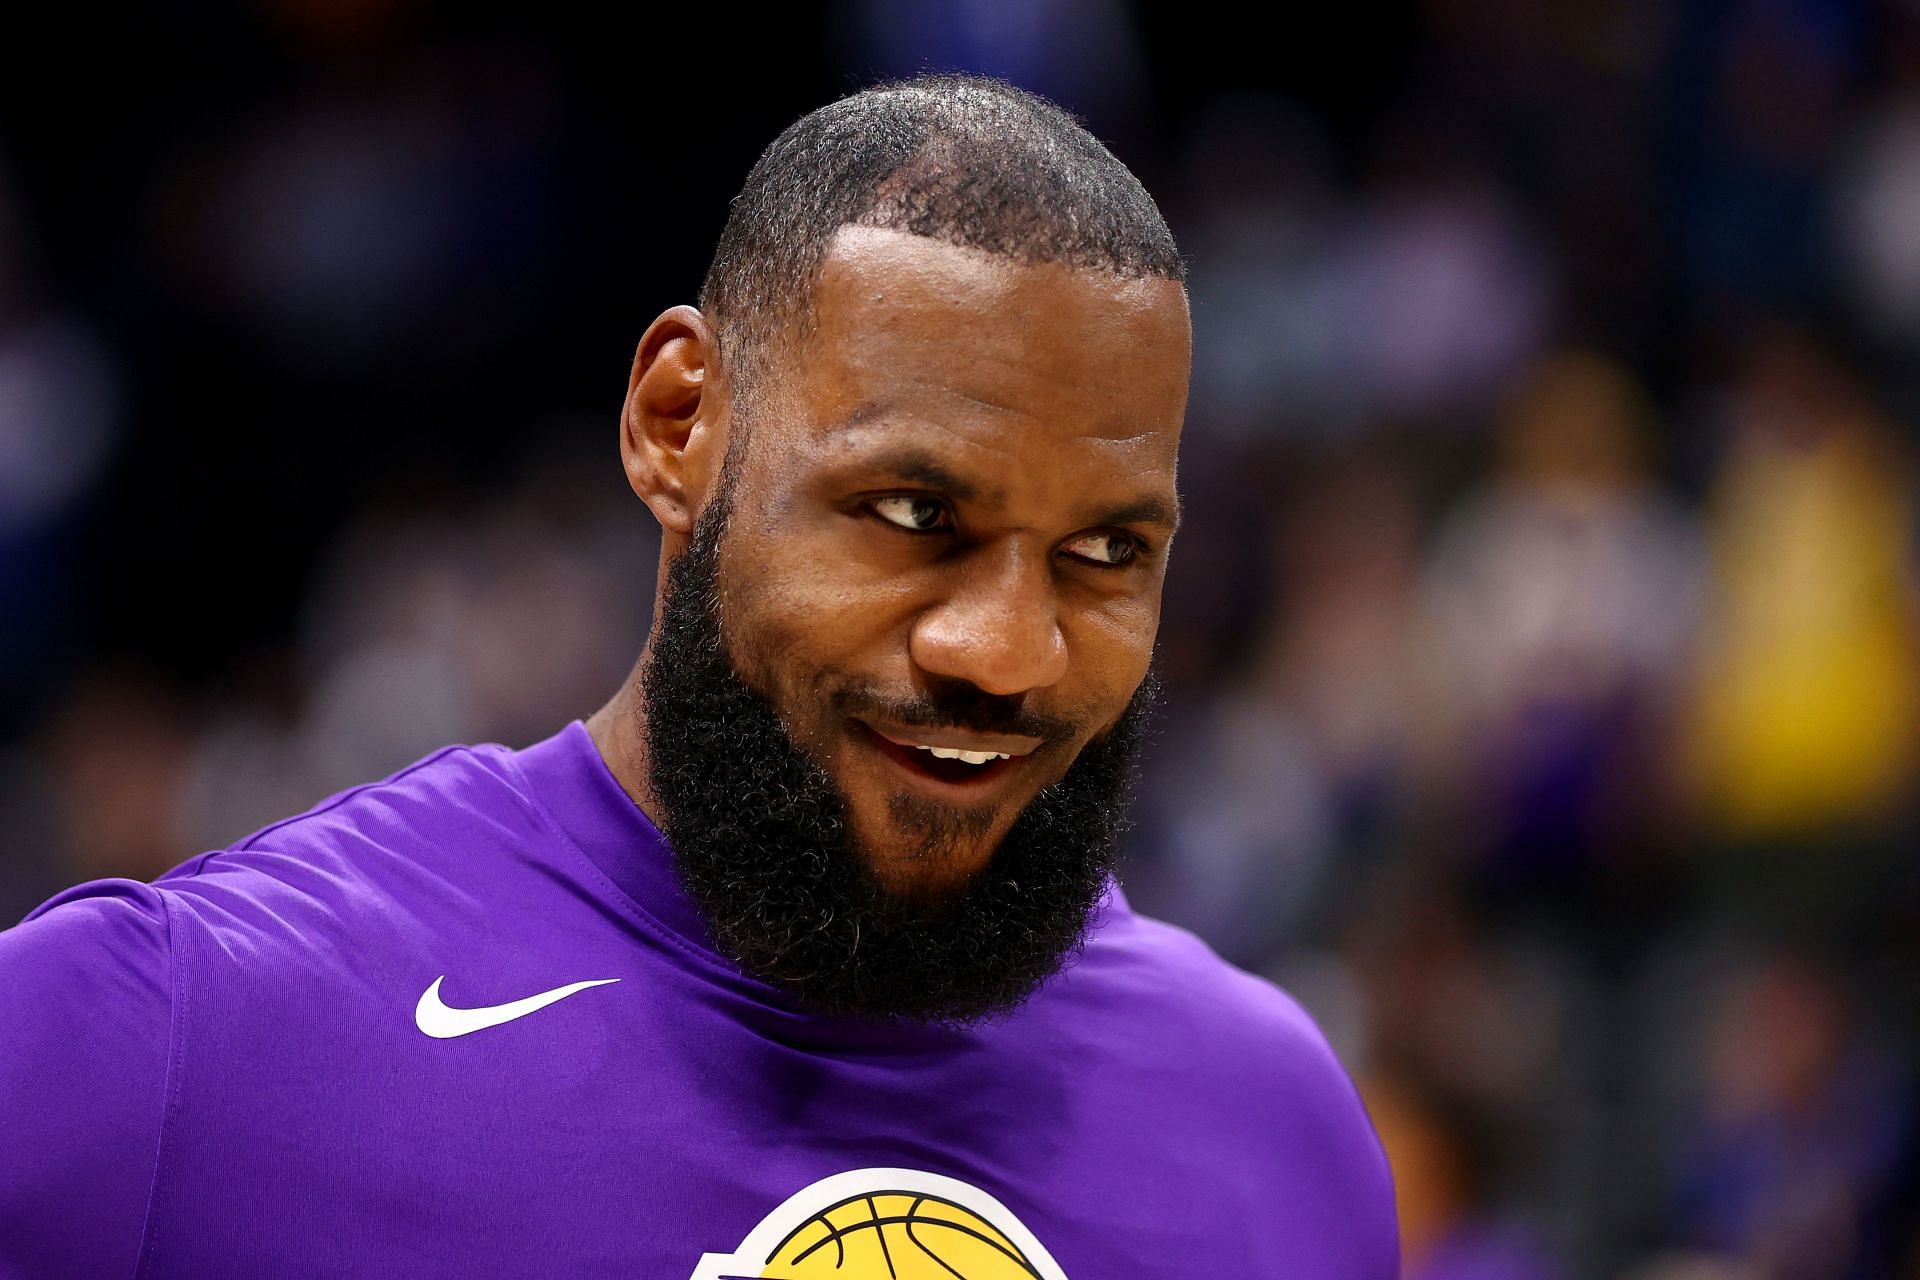 NFL franchise declares that its offer to LeBron James to join team